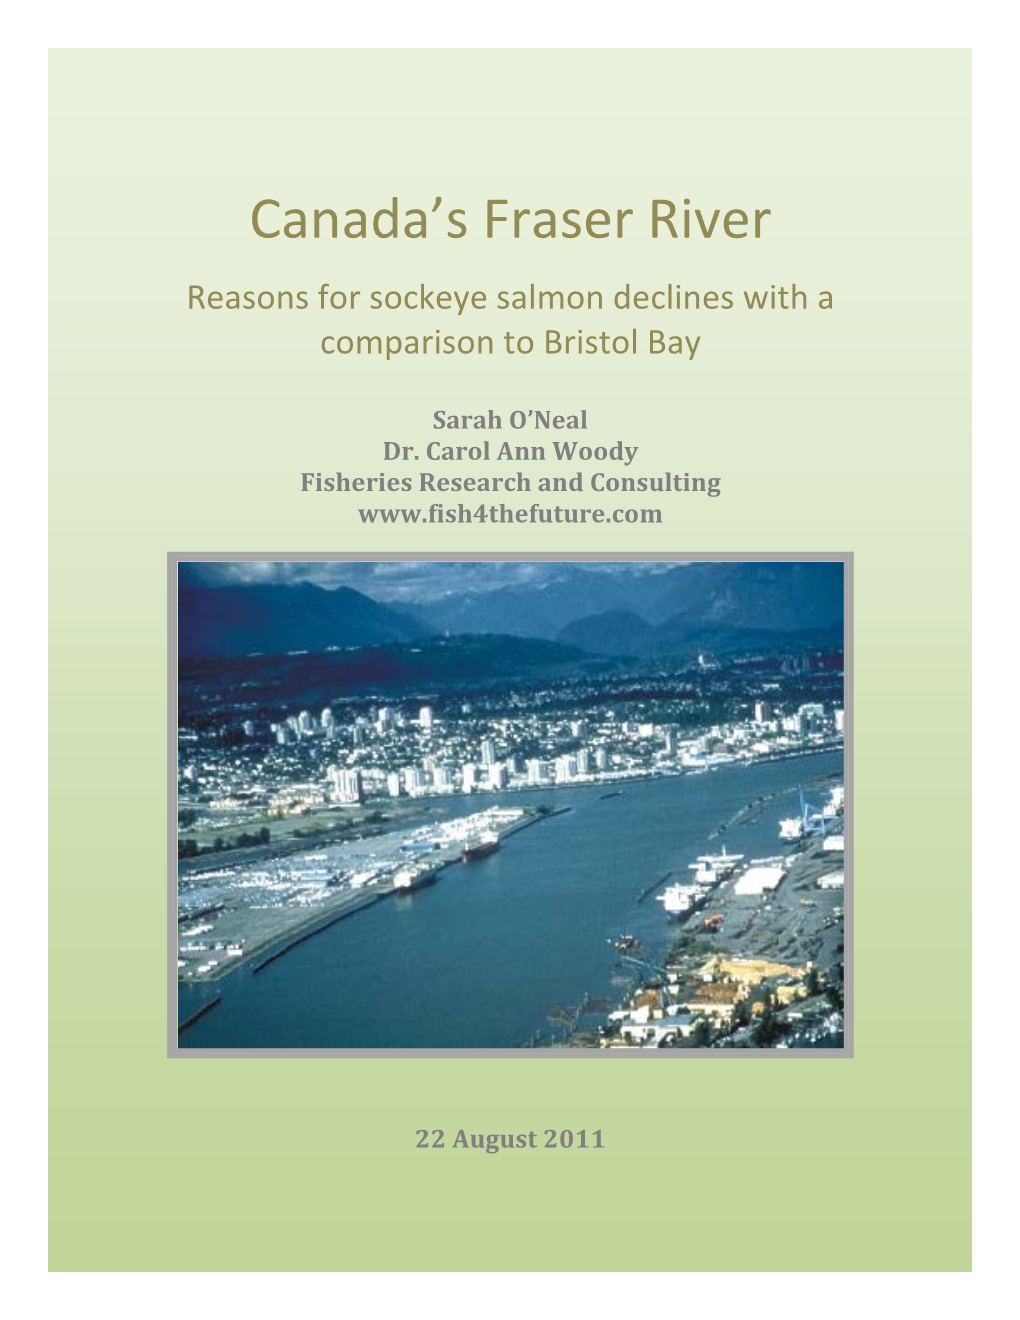 Canada's Fraser River: Reasons for Sockeye Salmon Declines with A